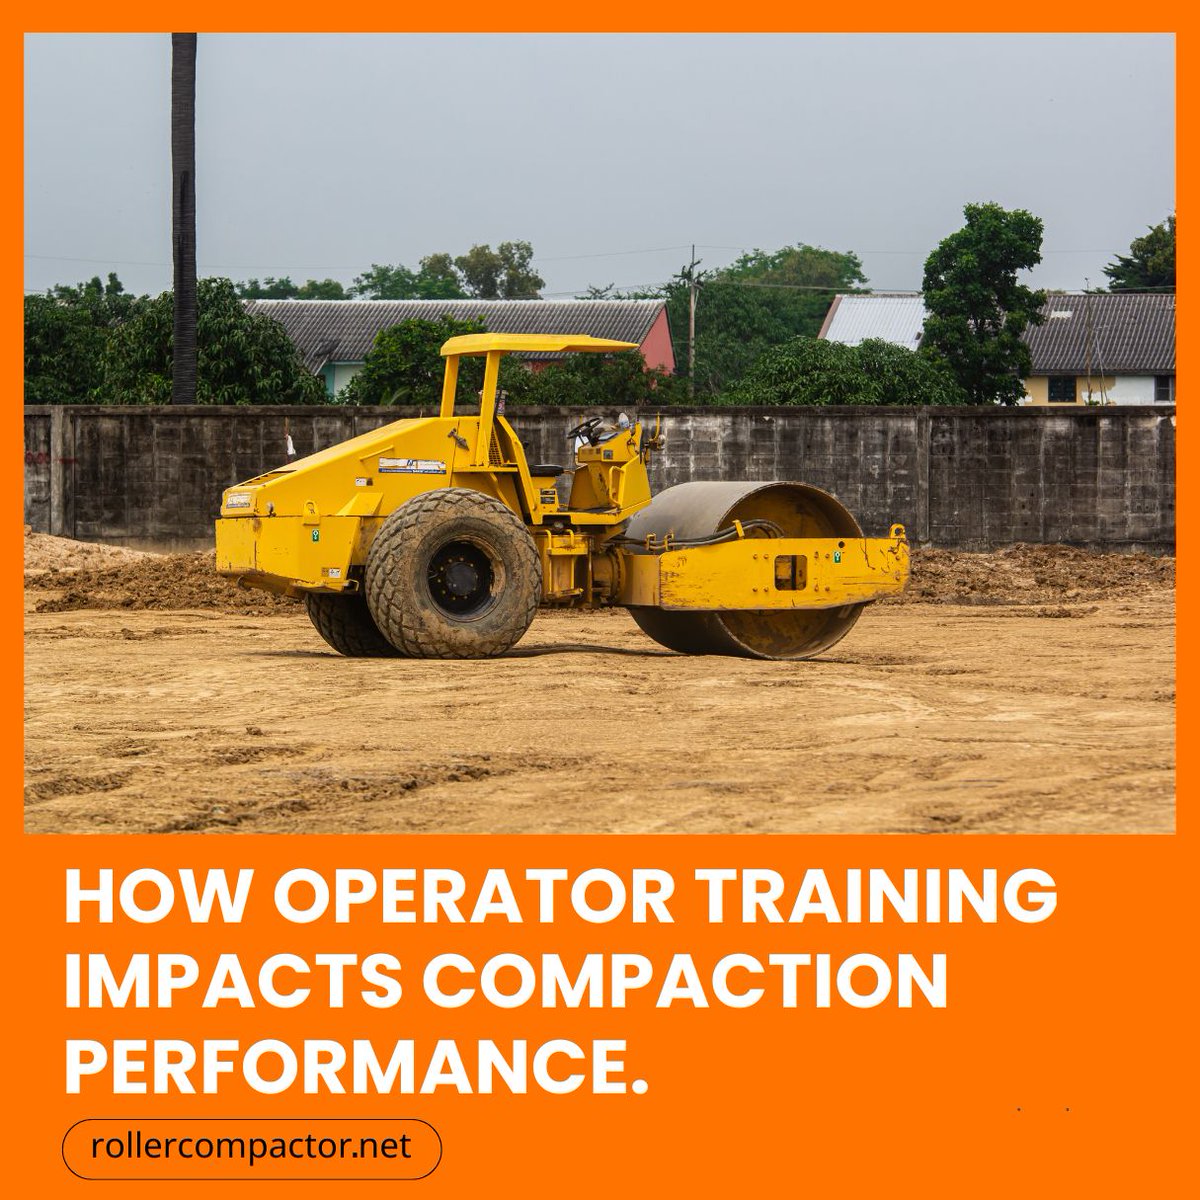 This blog post explores how operator training impacts compaction performance across various sectors, providing actionable insights for improving outcomes.

rollercompactor.net/how-operator-t…

#constructionmachinery #construction #constructionequipment #heavymachinery #heavyequipment